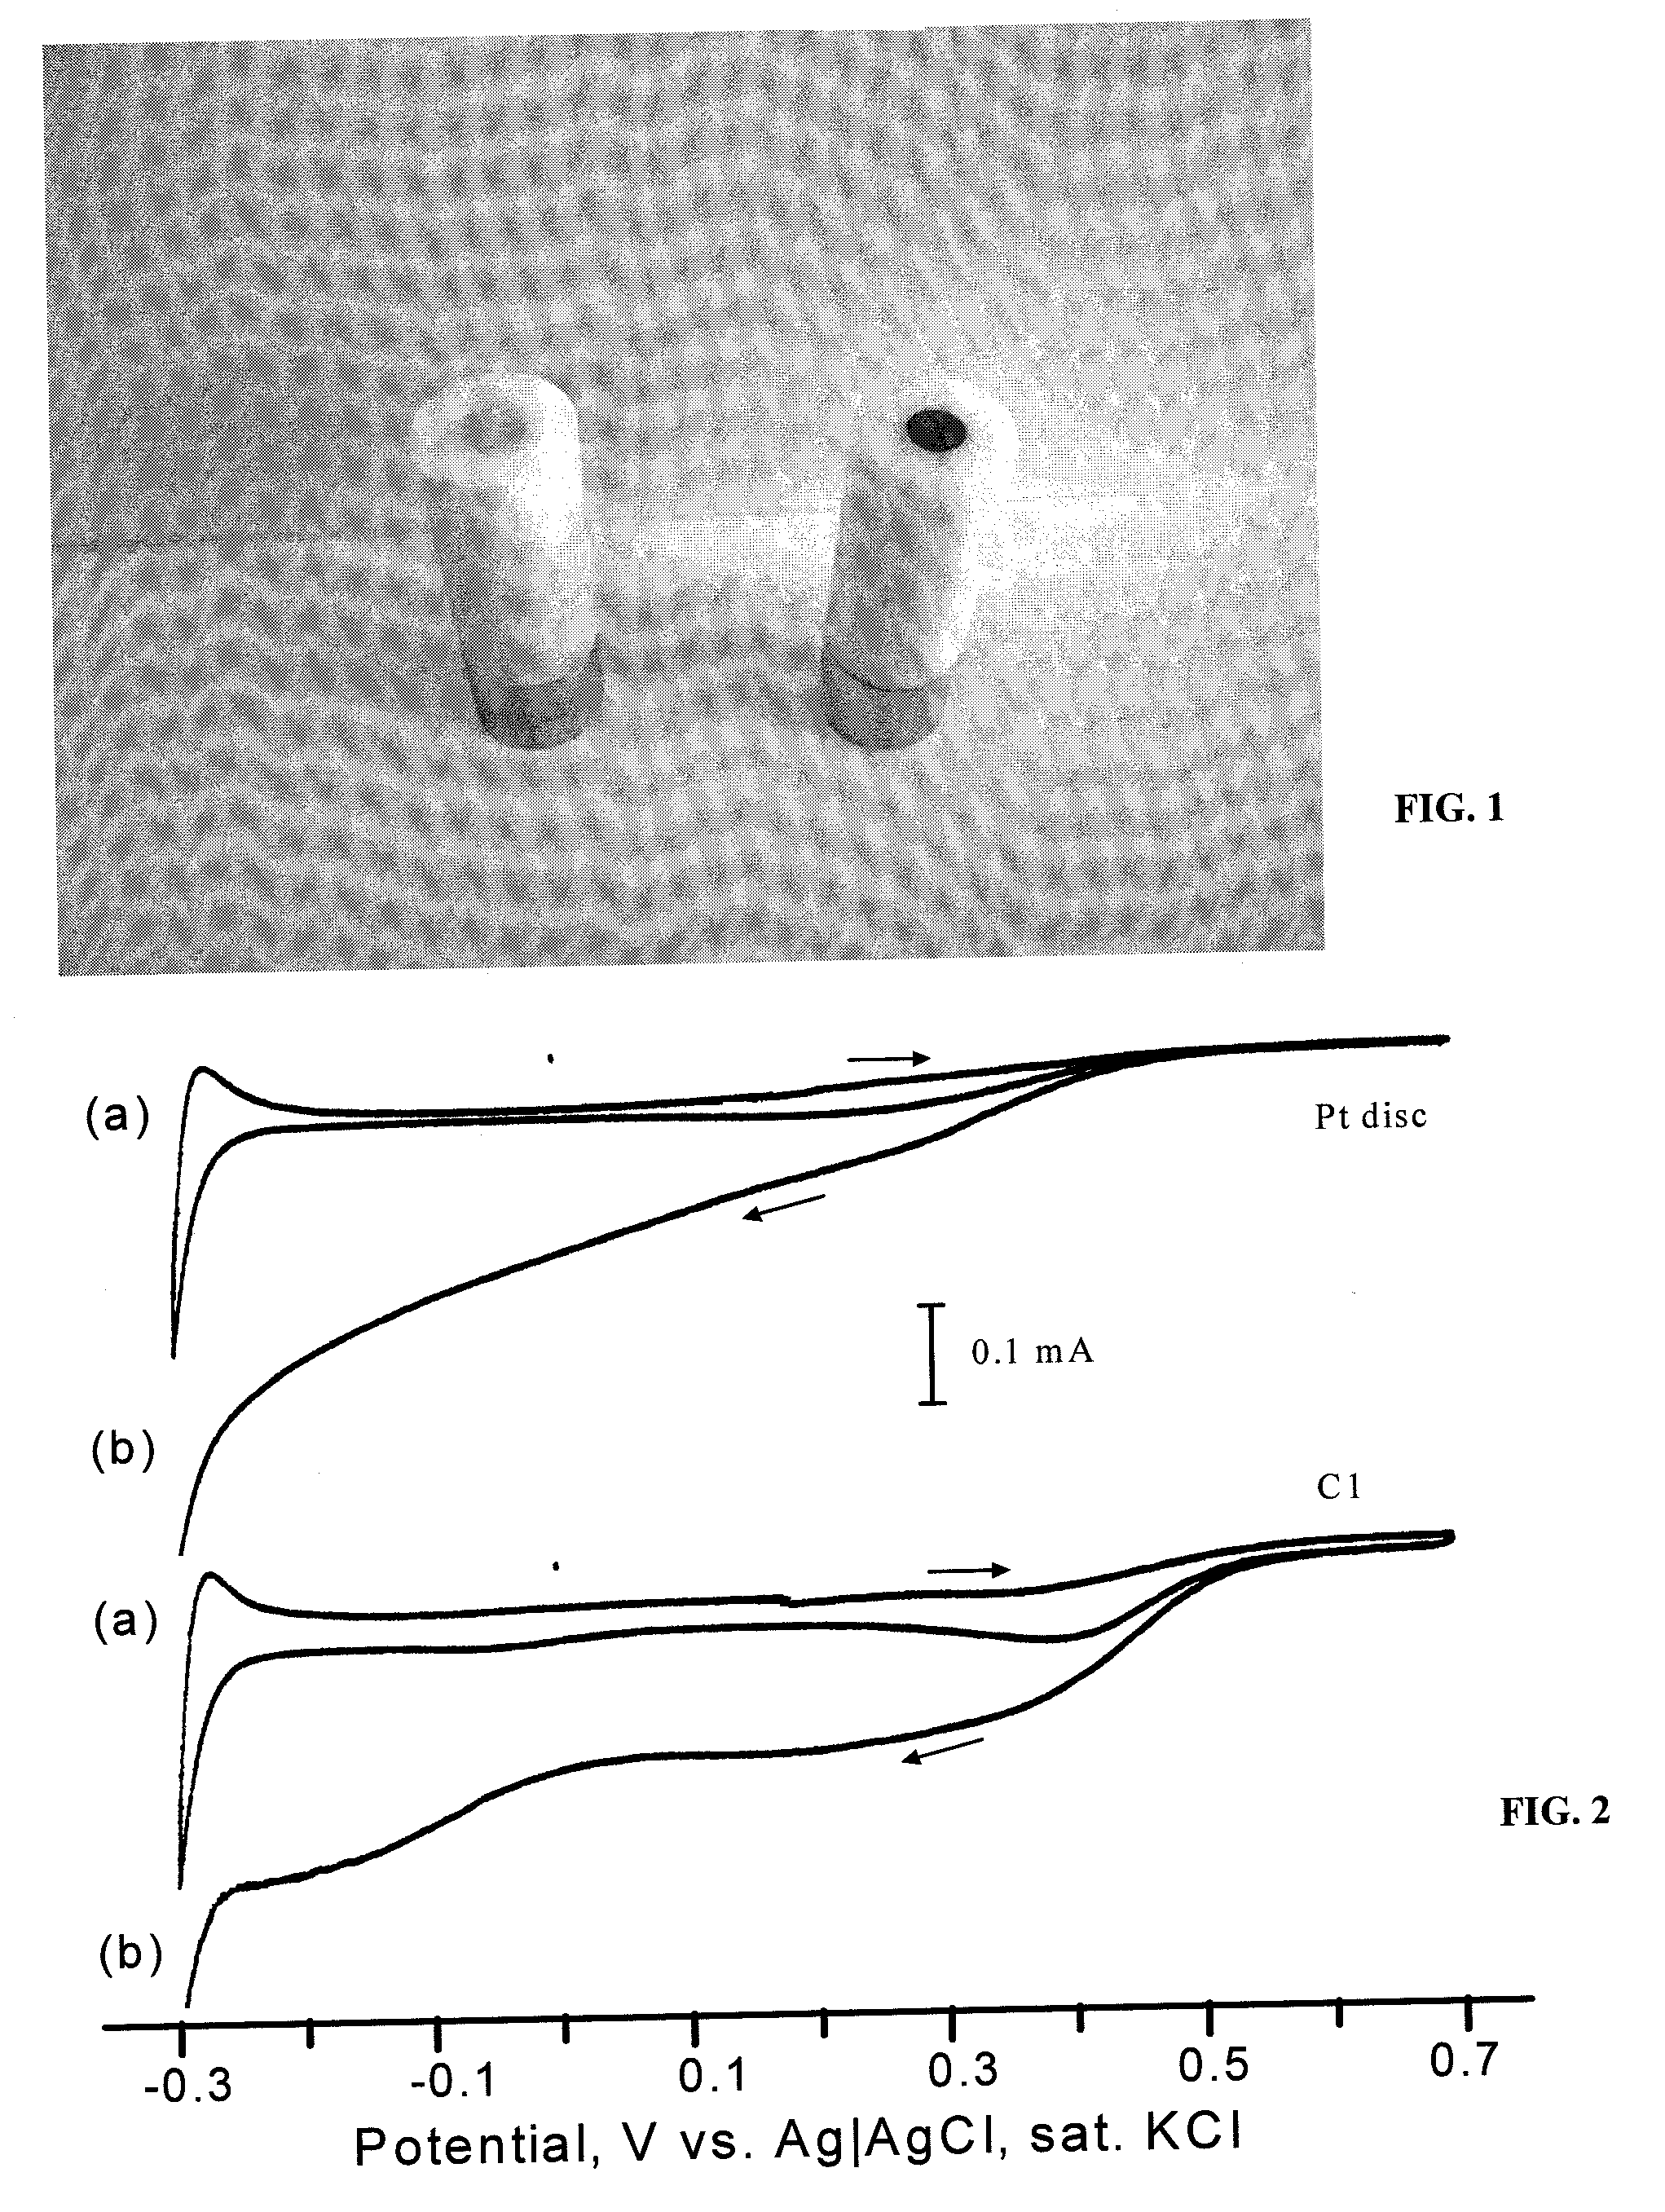 Photocatalytic Deposition of Metals and Compositions Comprising the Same